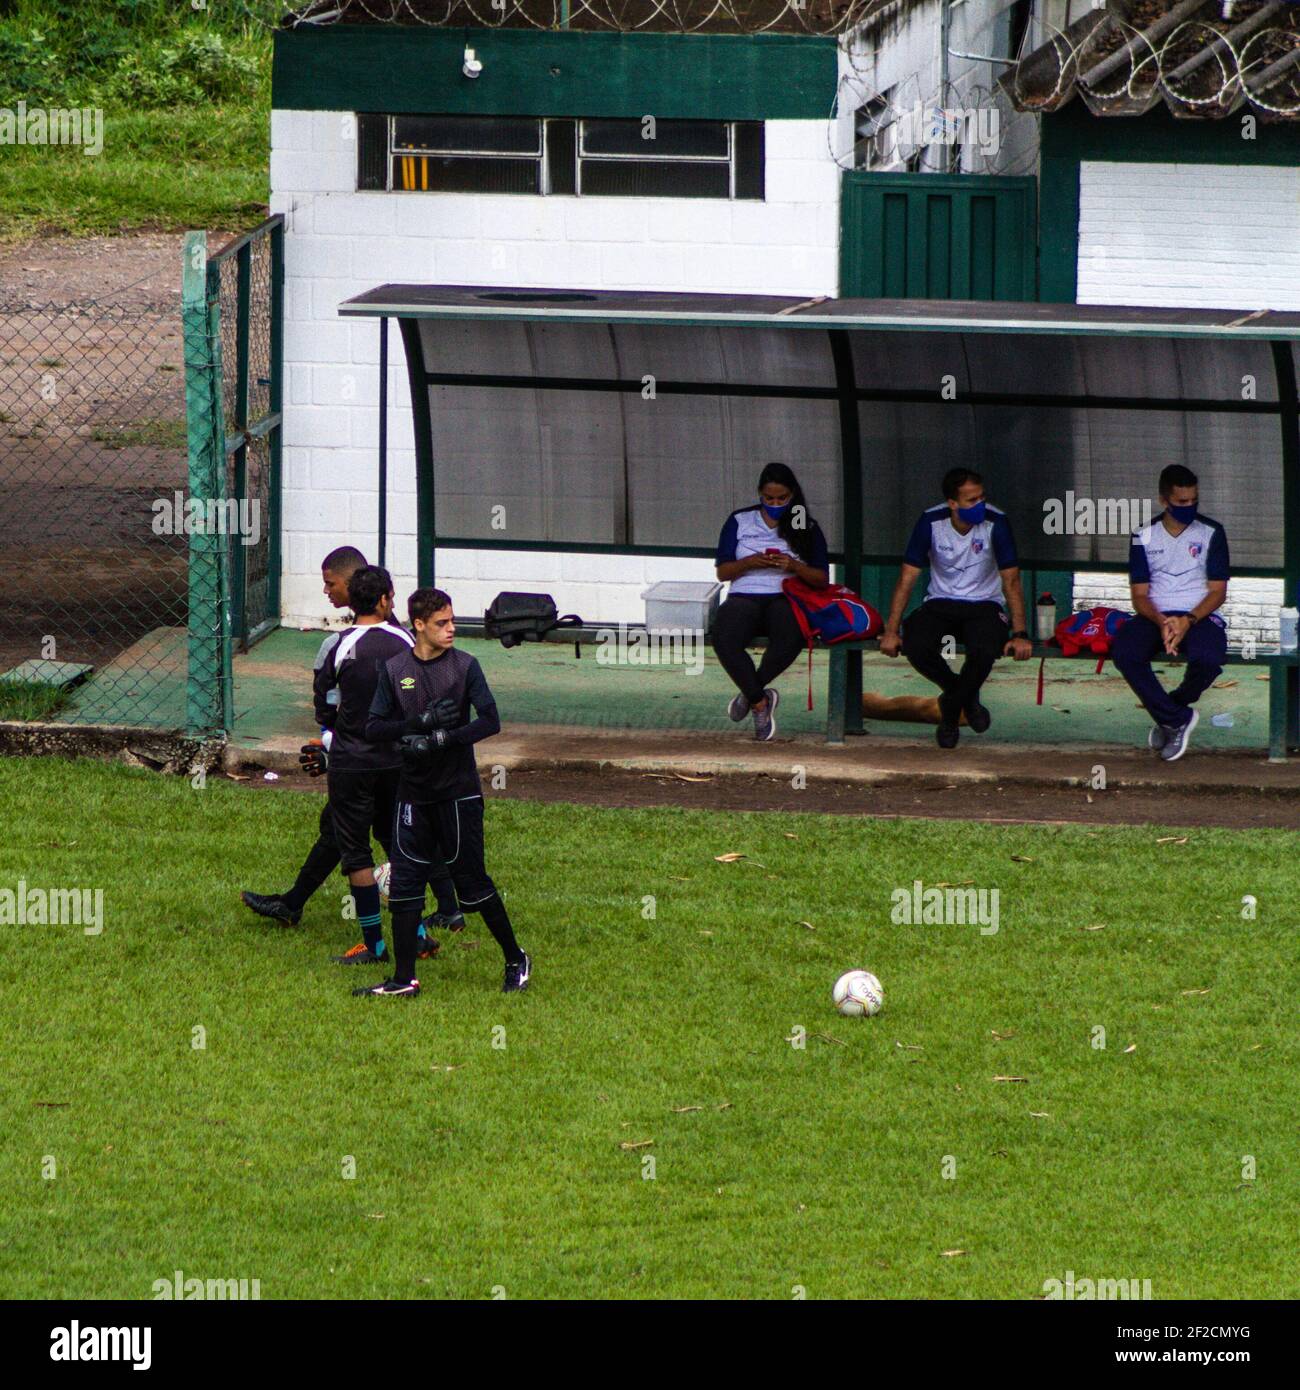 Betim, Brazil. 11th Mar, 2021. The Betim Futebol team is making a sieve for the U20 category in the city of Betim/MG from March 10 to 12. All health care and protocols are being followed. Credit: Luciano Mariano/FotoArena/Alamy Live News Stock Photo